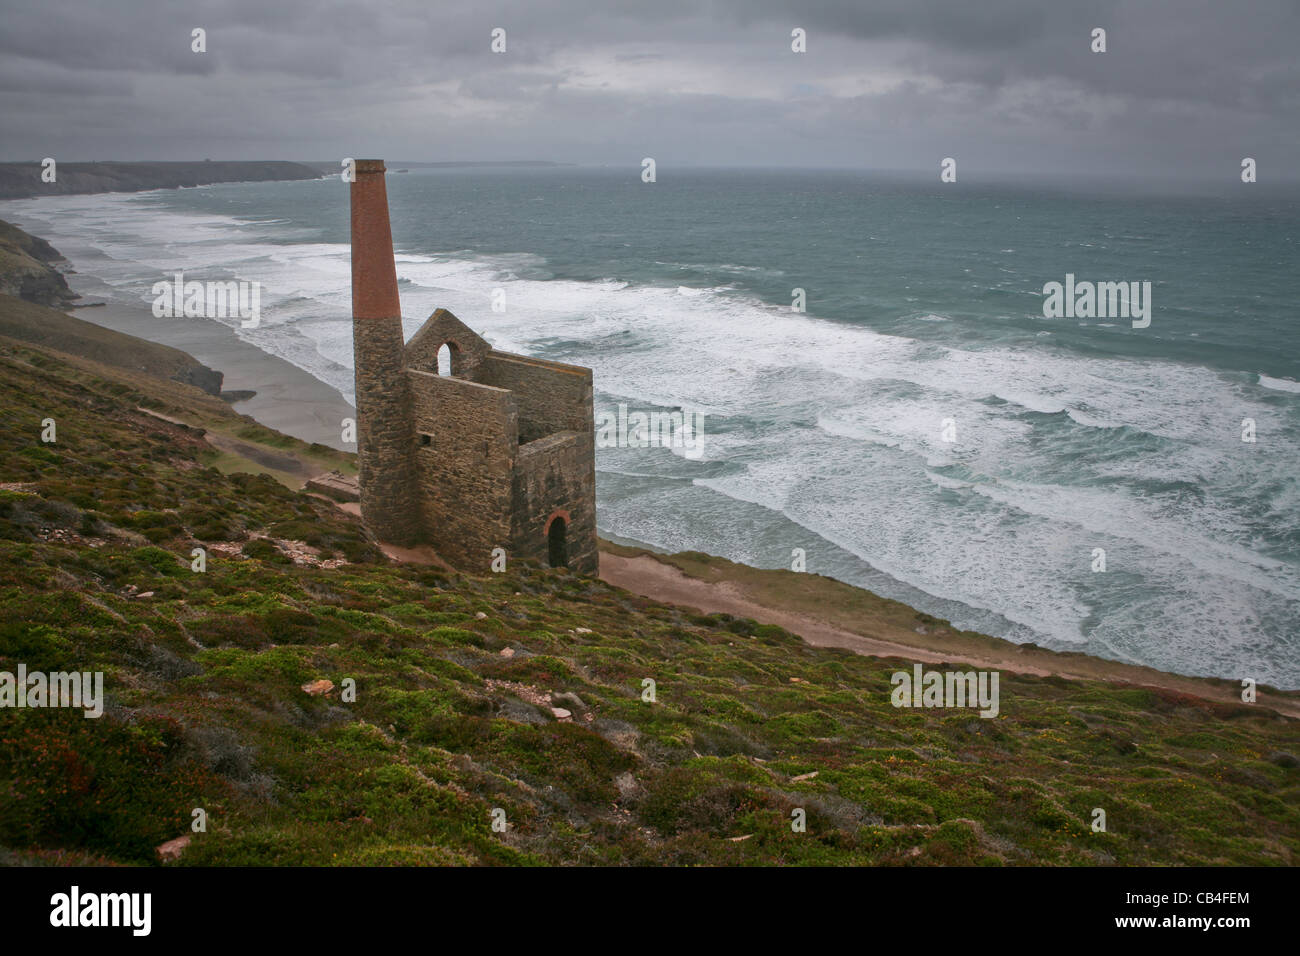 Wheal Coates Tin Mine, Chapel Porth, Cornwall coastal path, on a stormy day, view looking out to sea Stock Photo